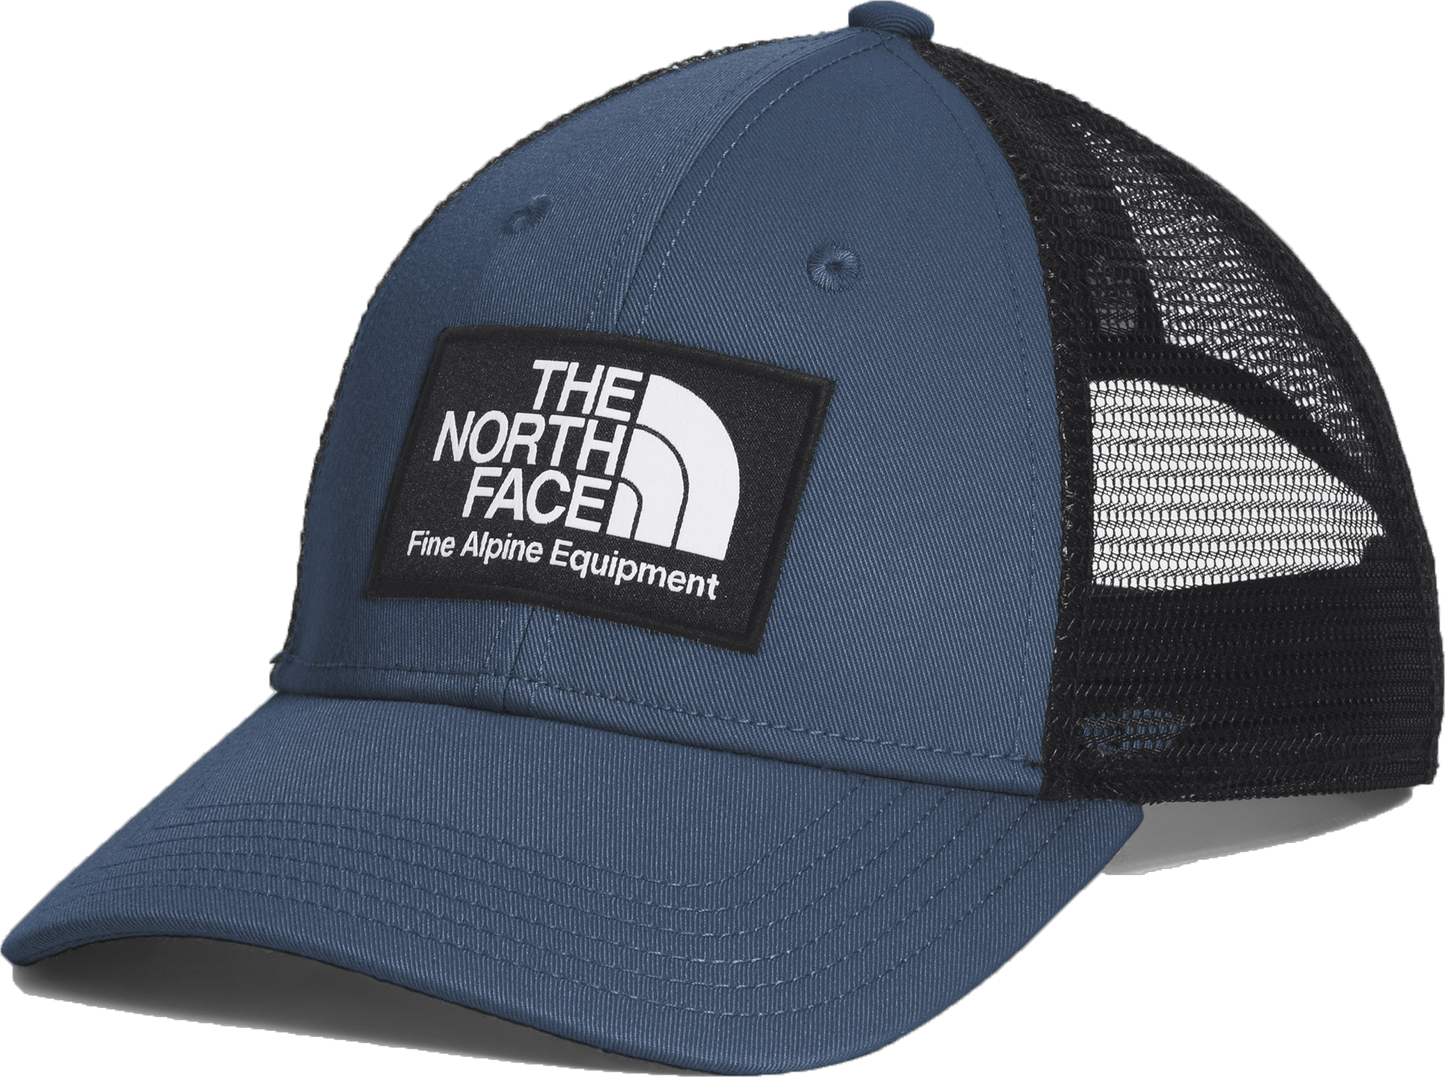 The North Face Accessories Mudder Trucker Hat Shady Blue